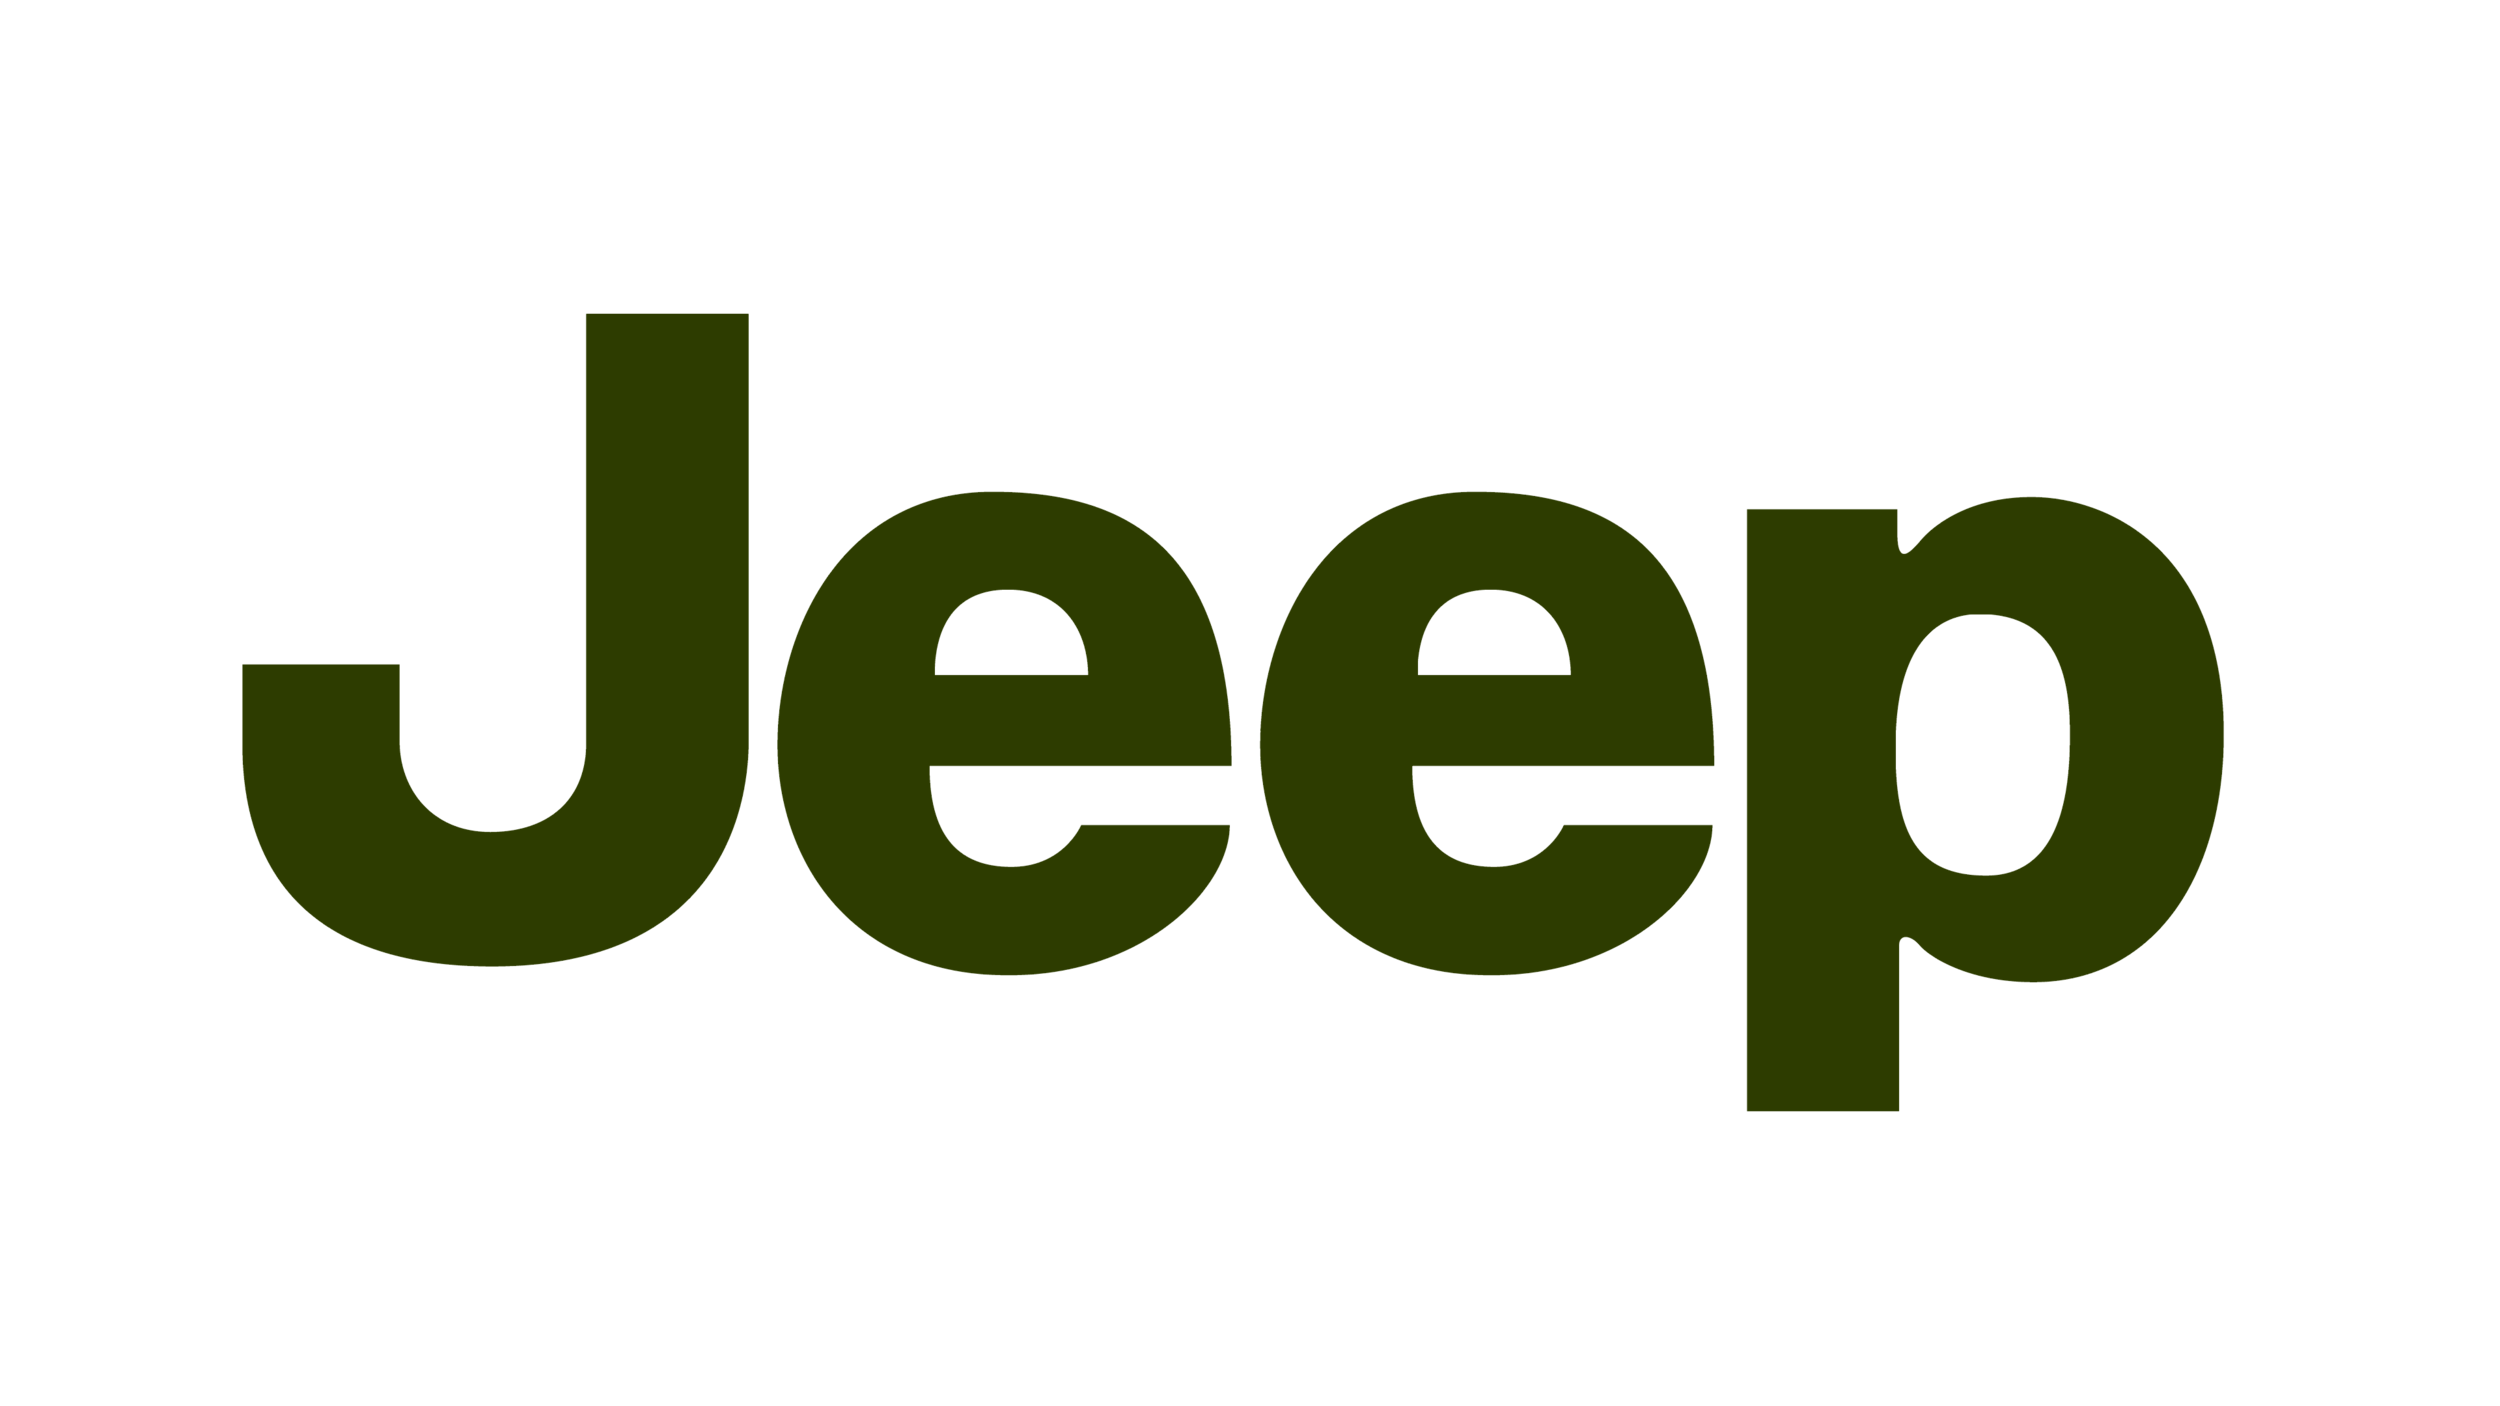 Jeep-logo-green-3840x2160.png